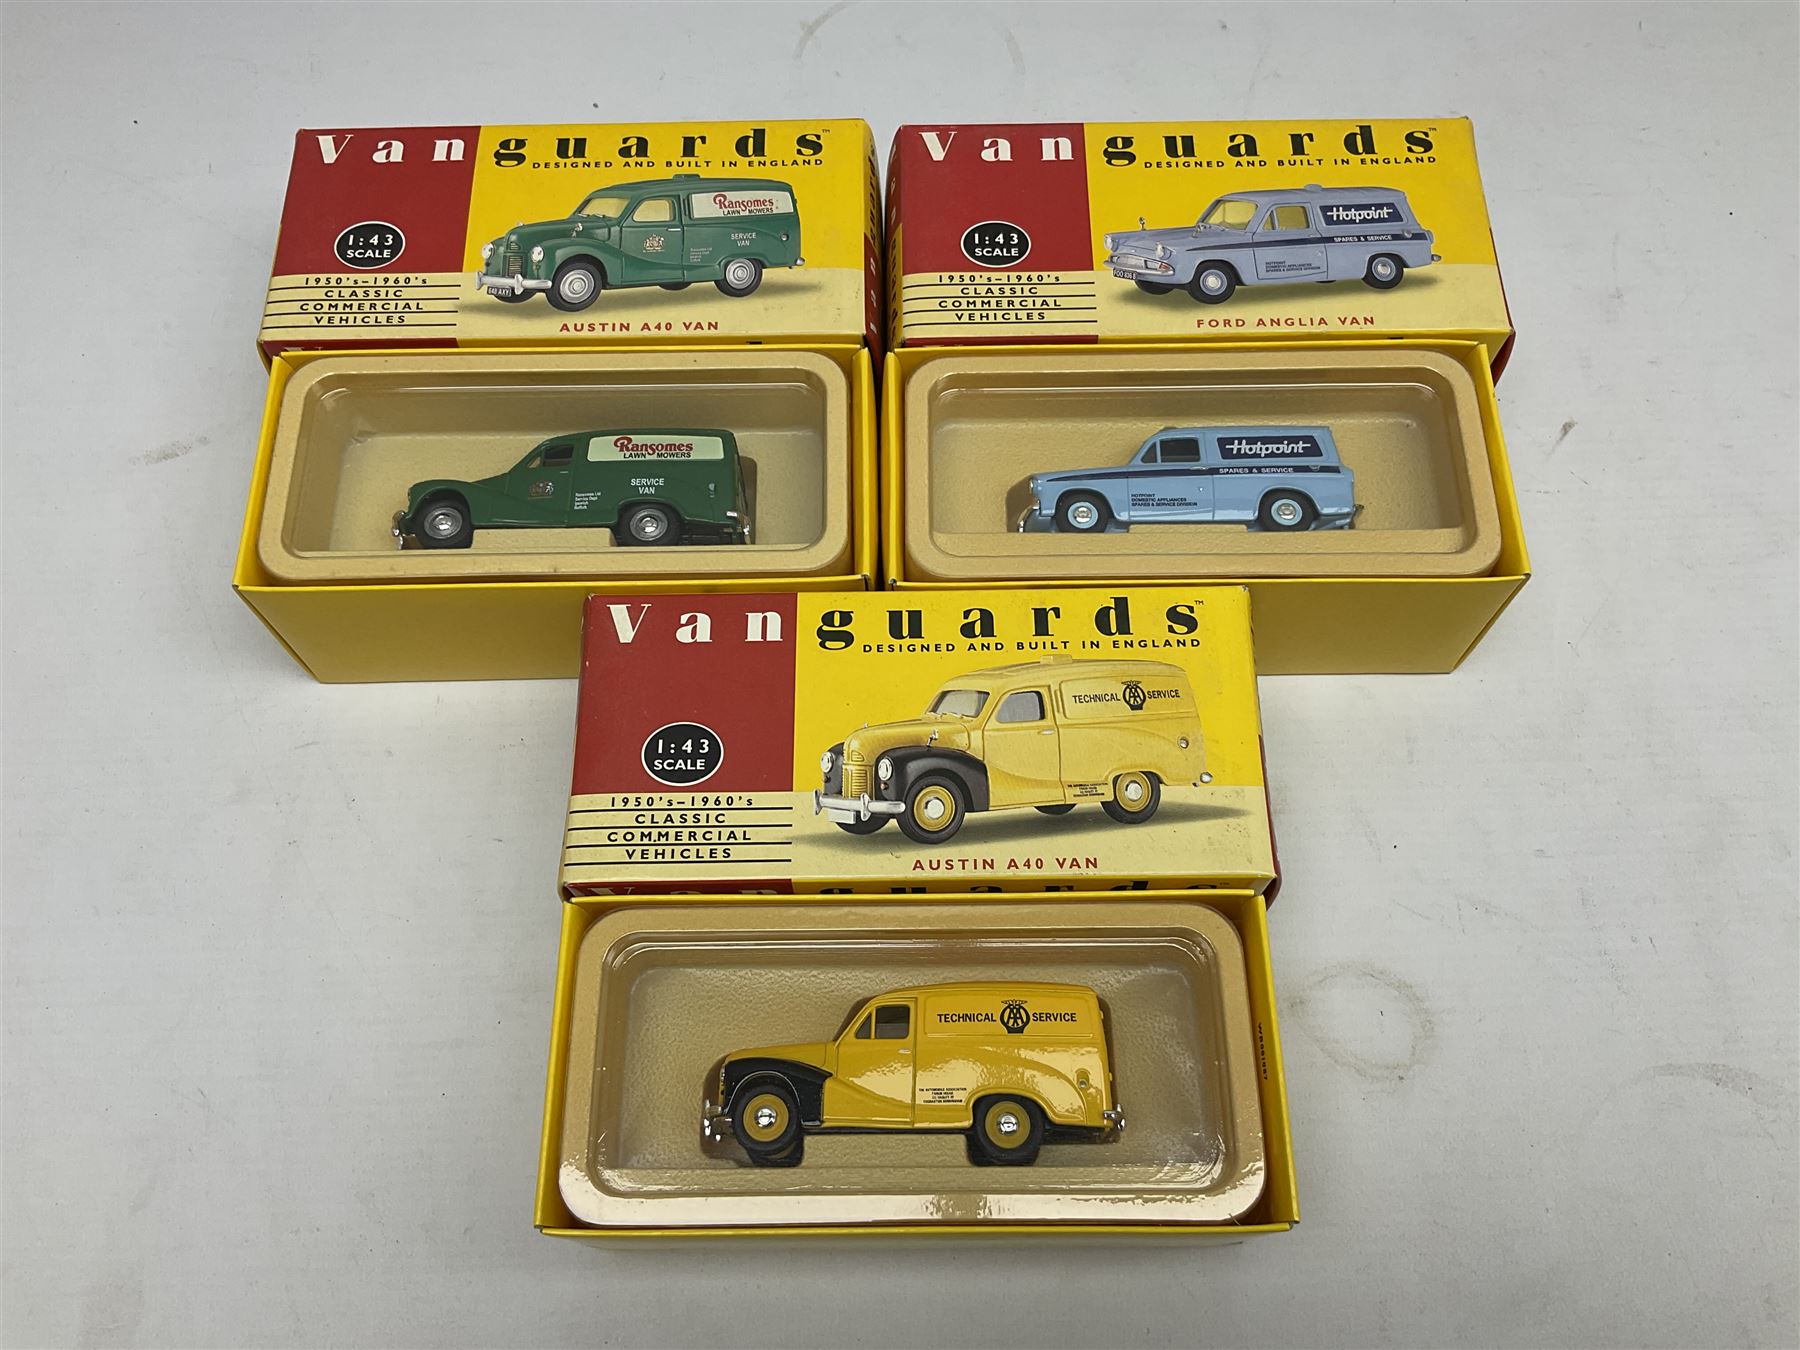 Sixteen Lledo Vanguards 1:43 scale 1950's-1960's Classic Commercial Vehicles die-cast models - Image 8 of 8